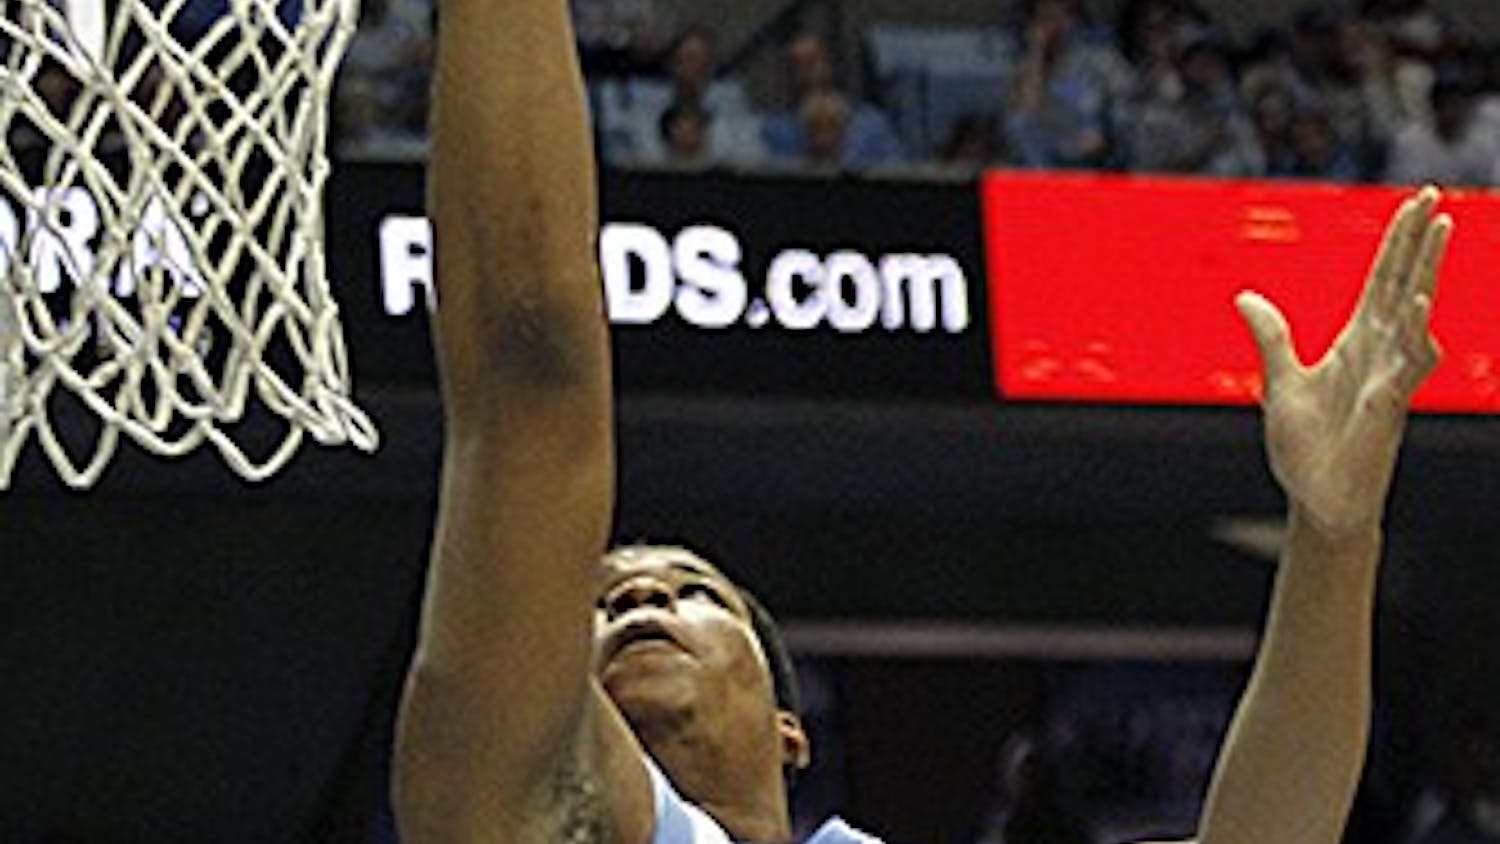 UNC Men's Basketball beat Wake Forest 105-72 on Saturday February 22. 